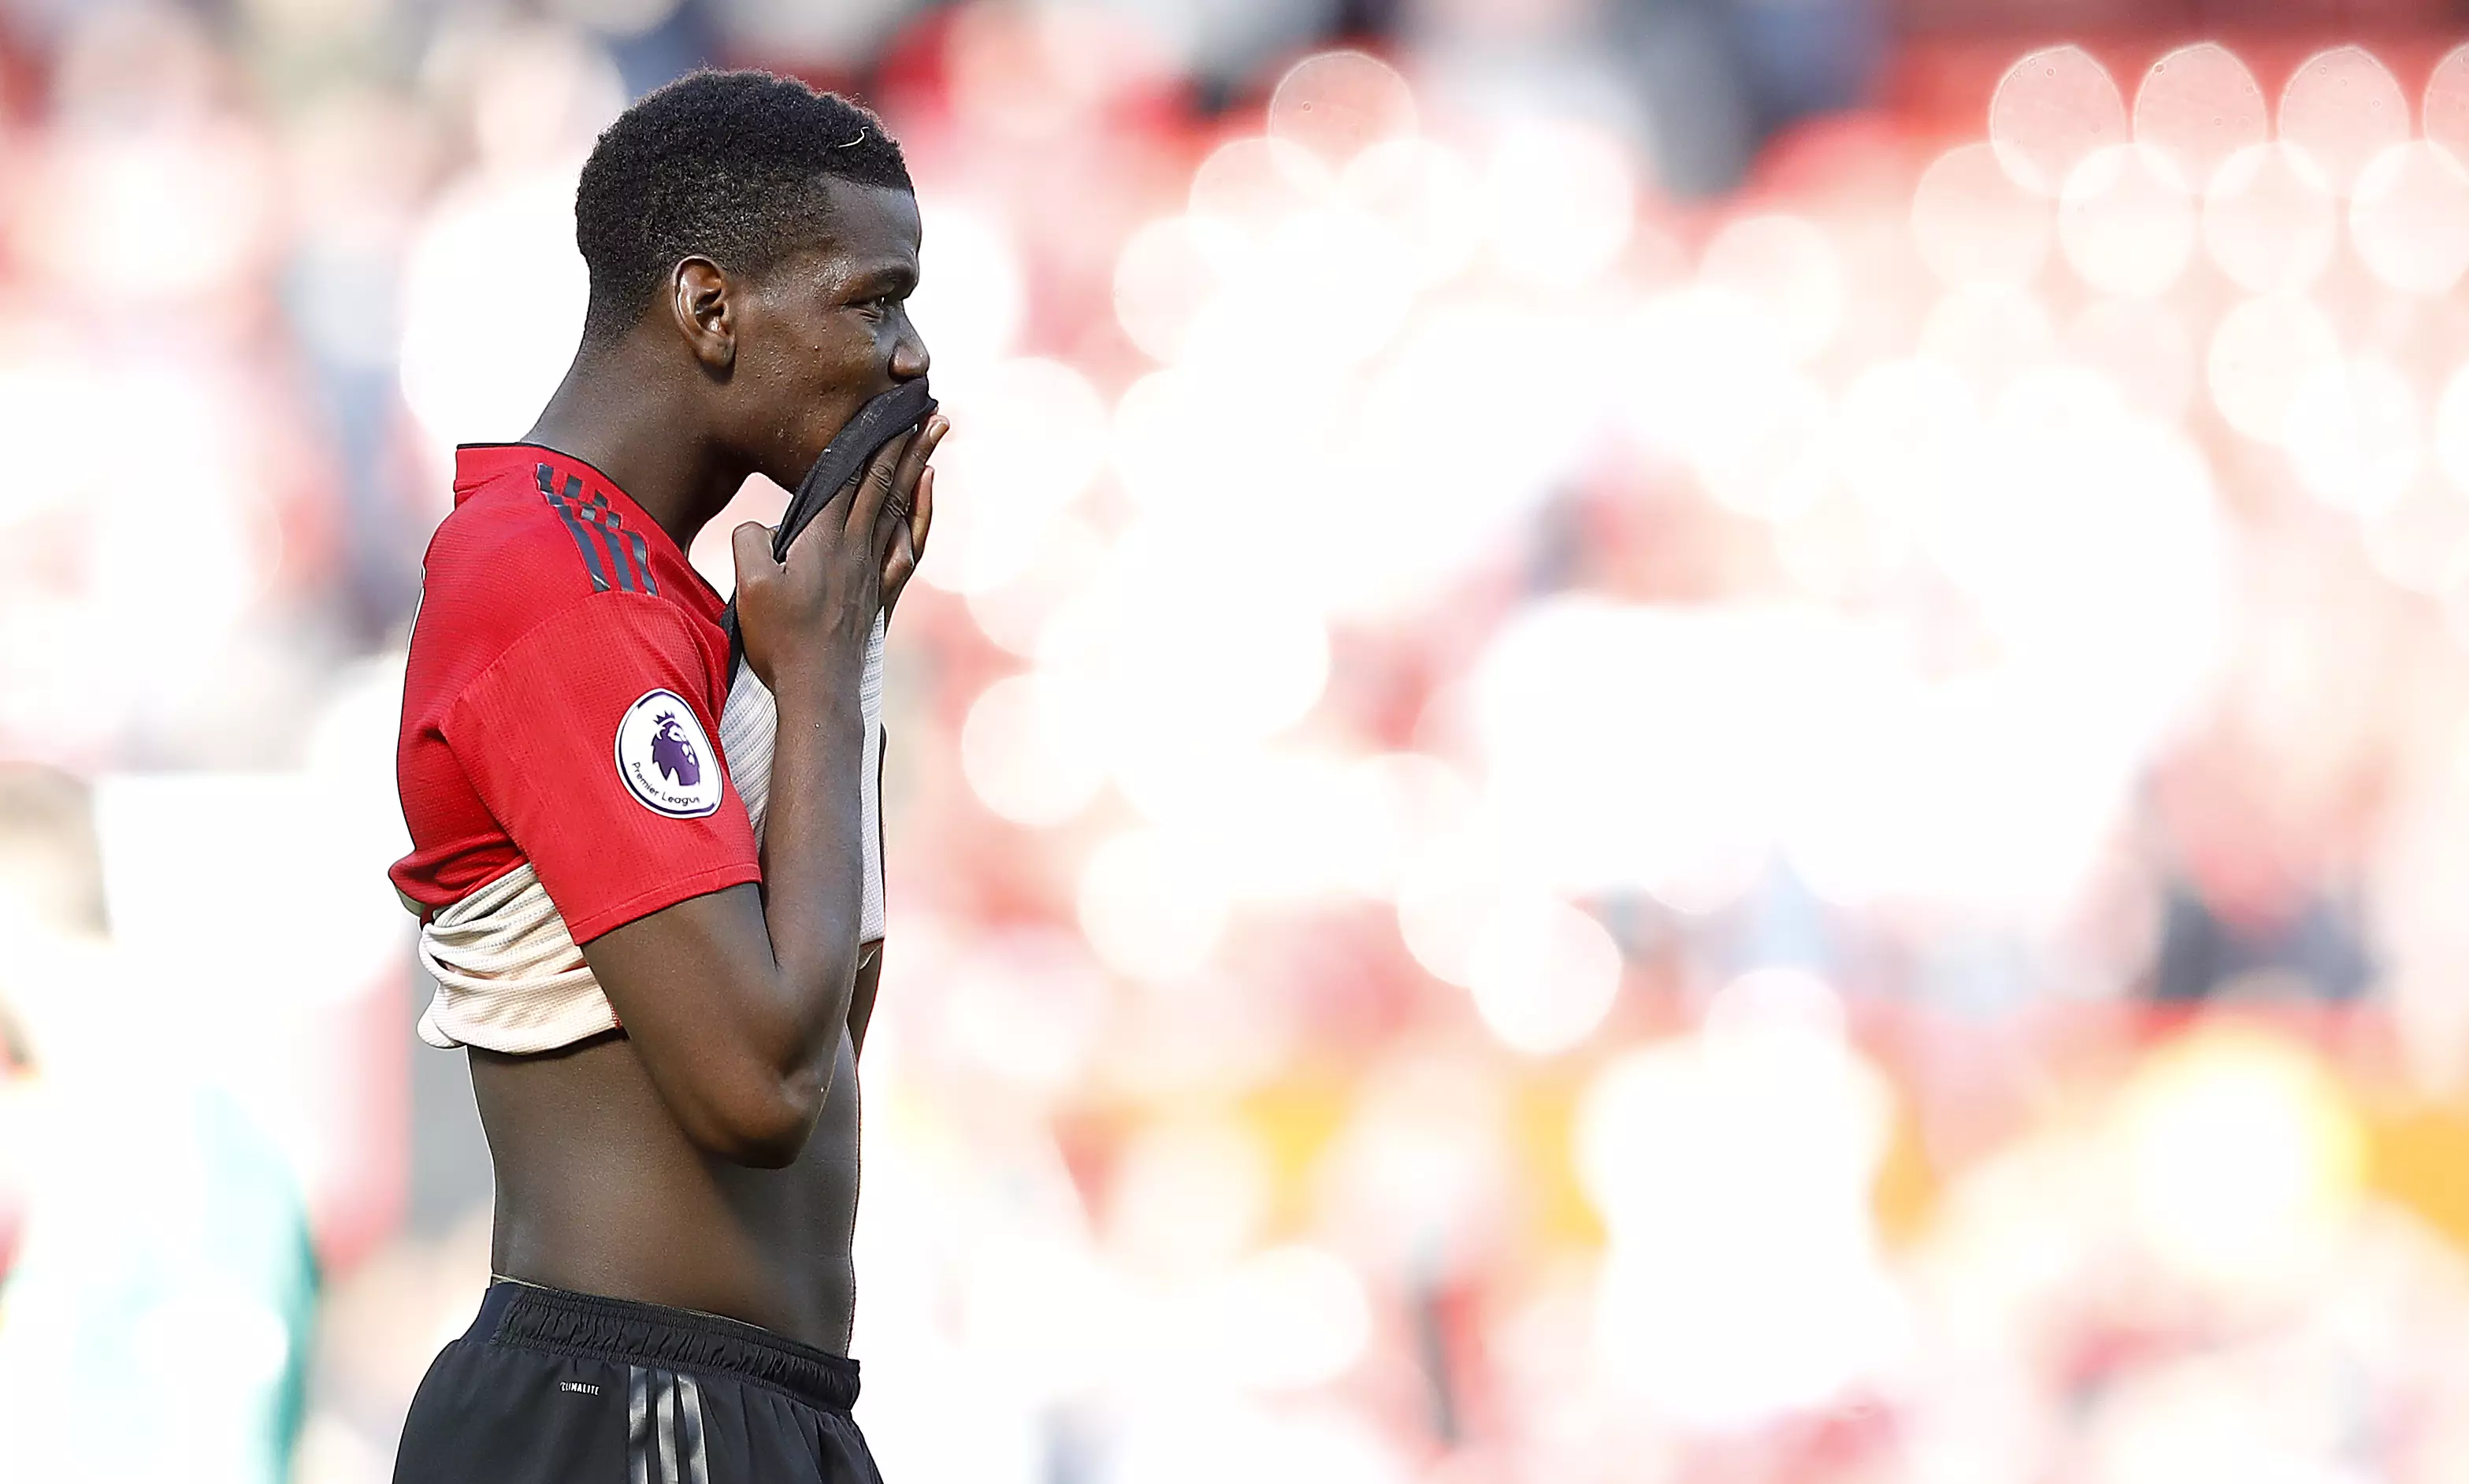 Pogba has come under a lot of criticism for his inconsistent season. Image: PA Images